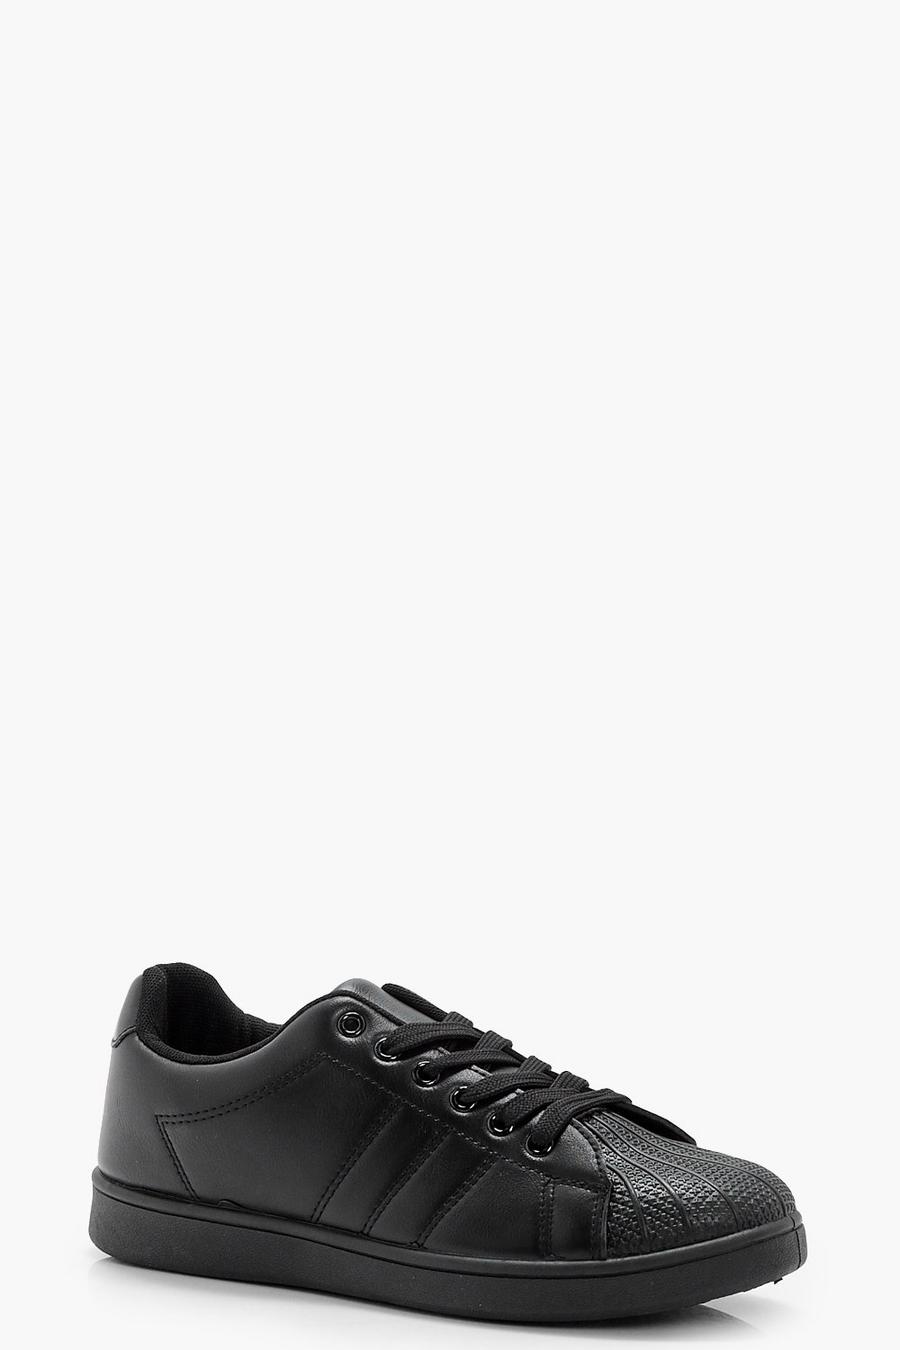 Black Lace Up Trainers image number 1